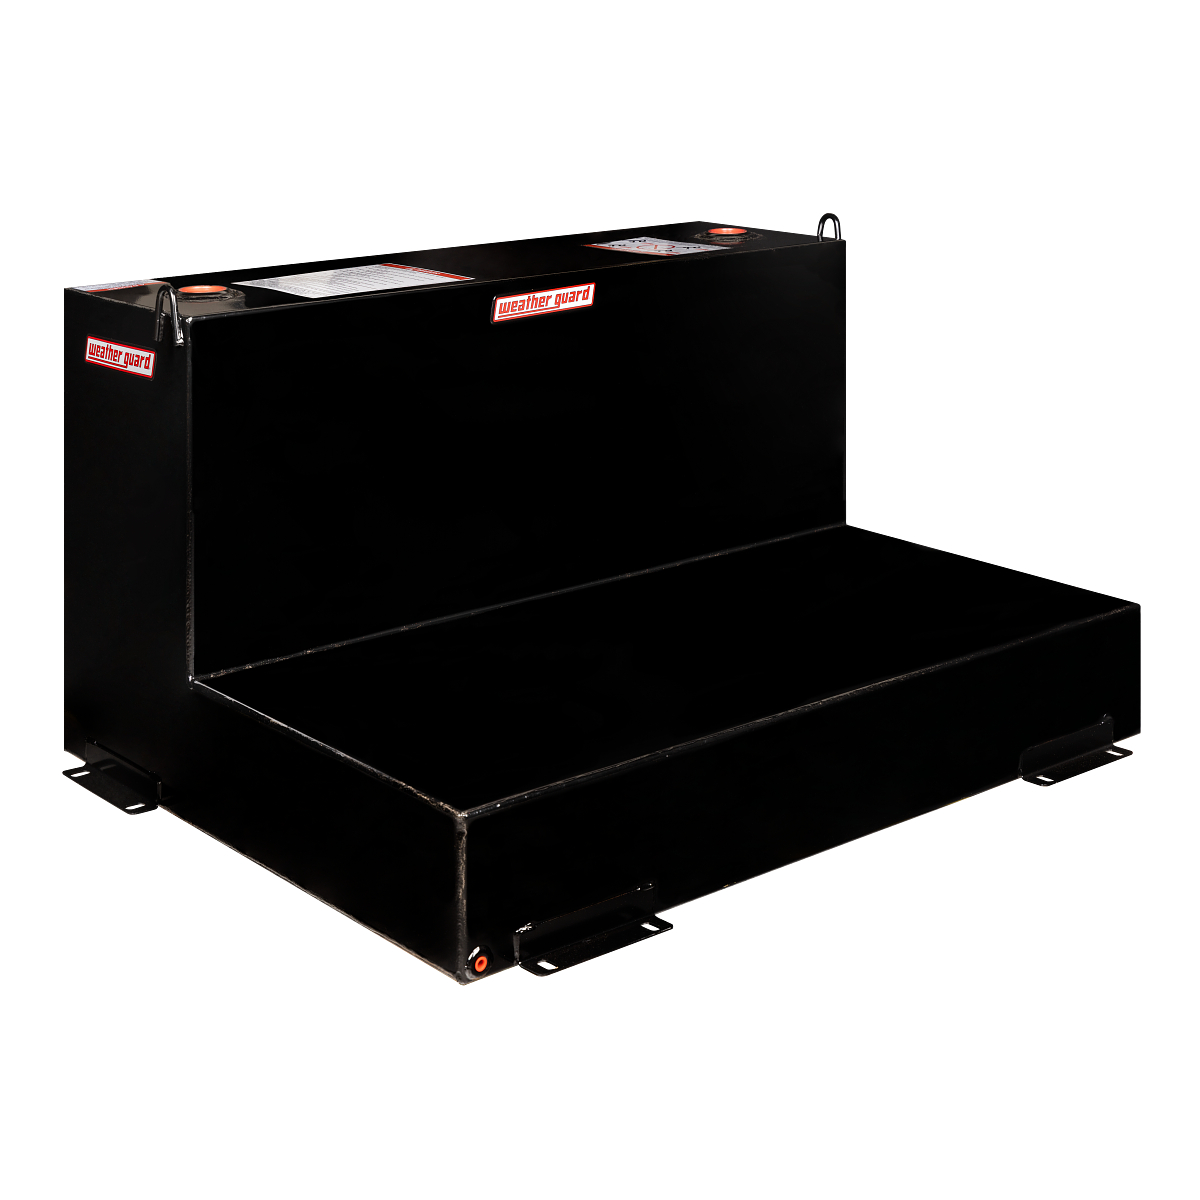 Product Review: Fuel Tank/Toolbox Combo